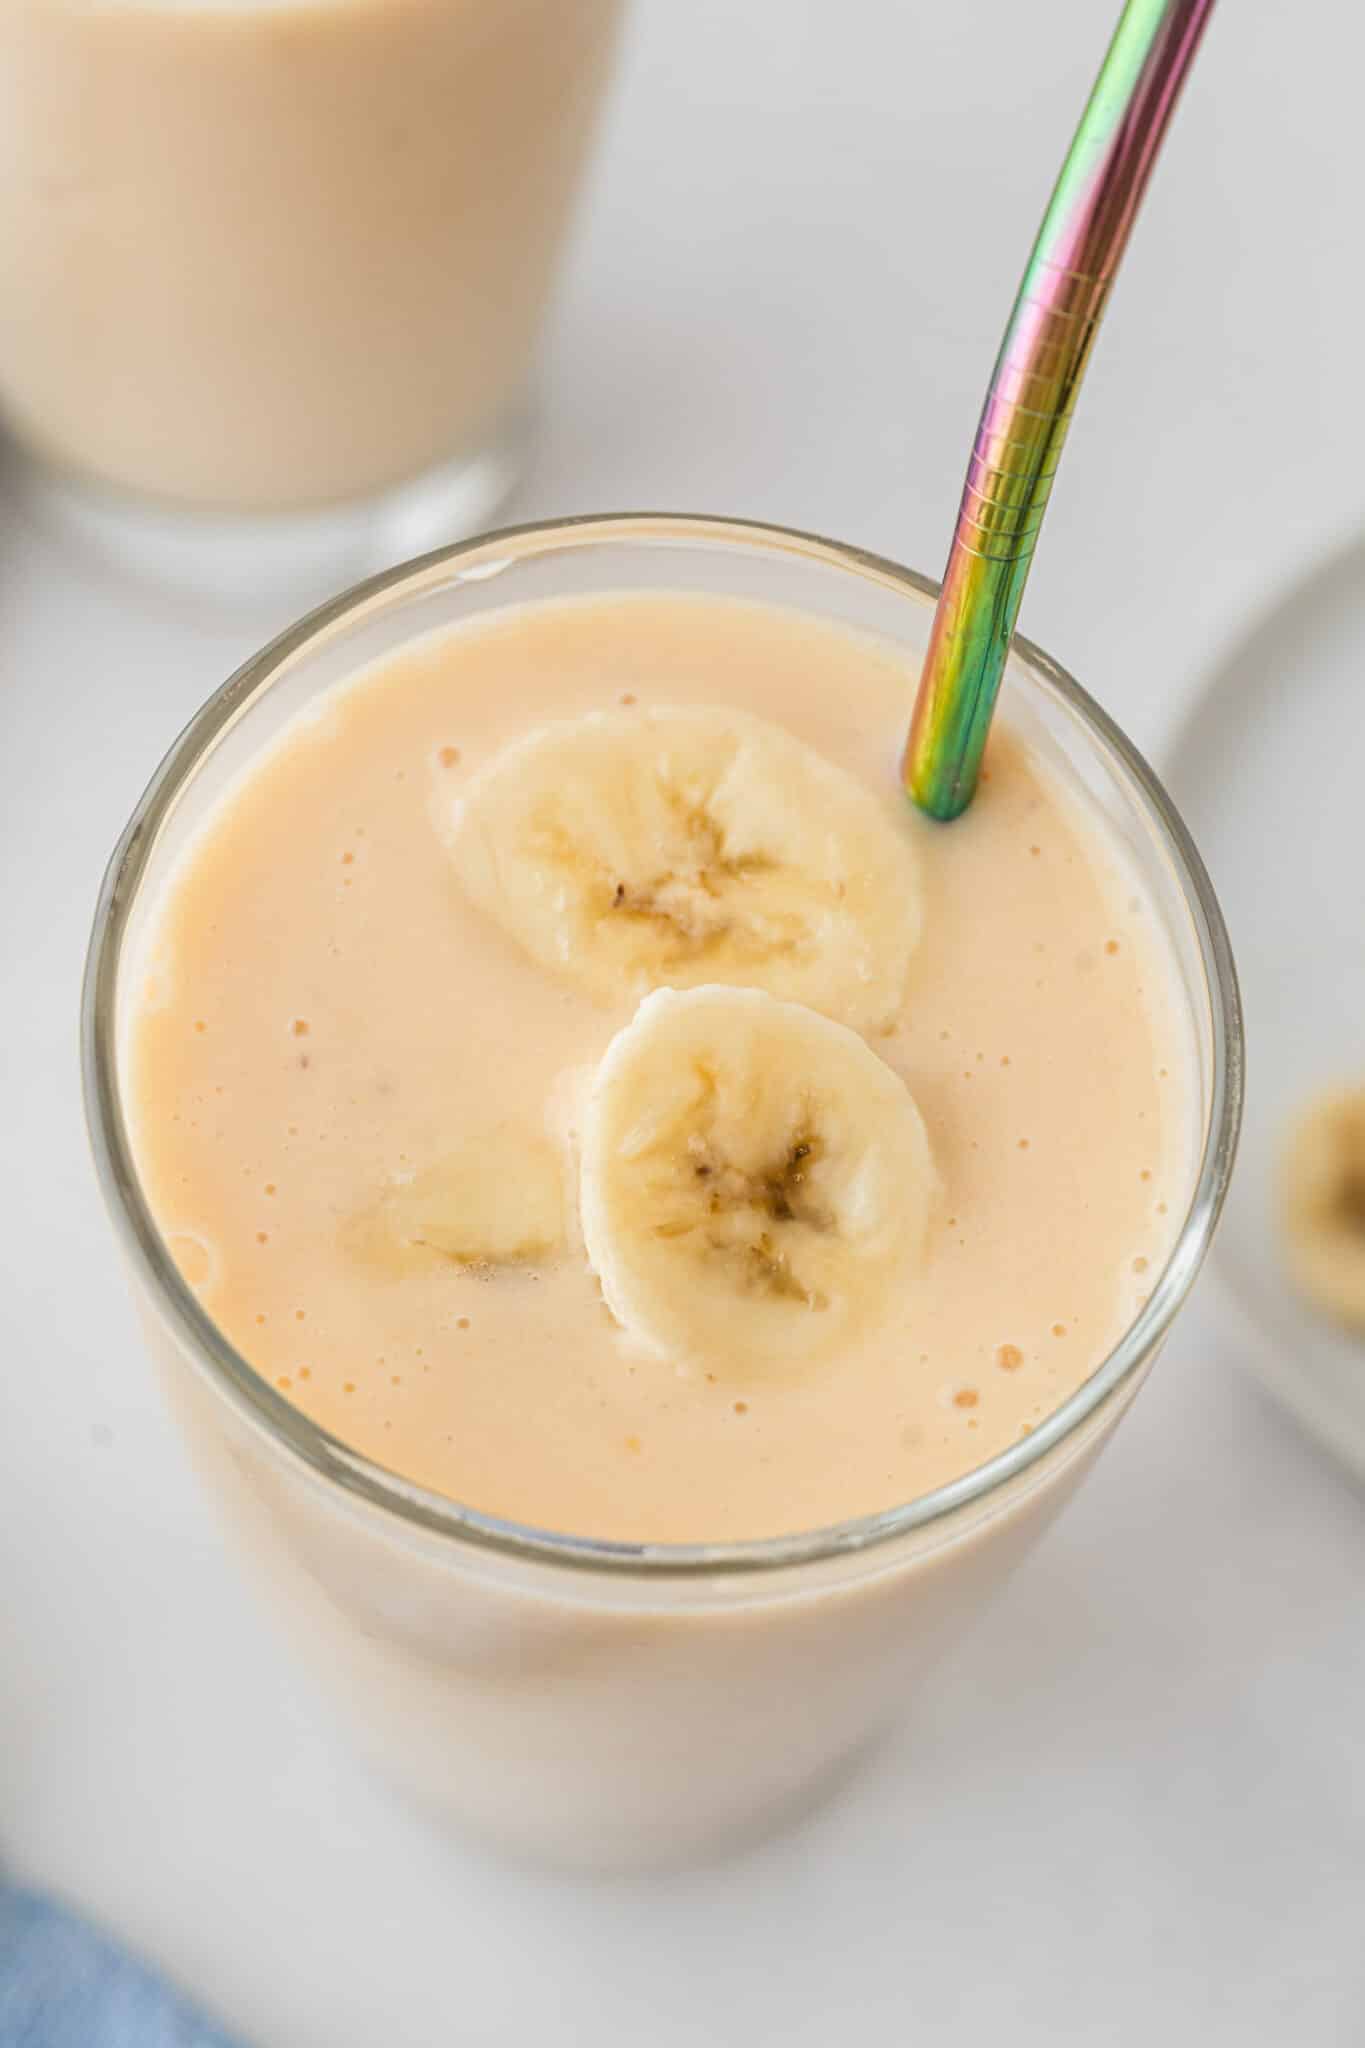 Close up of banana slices on top of a glass of banana peach smoothie.